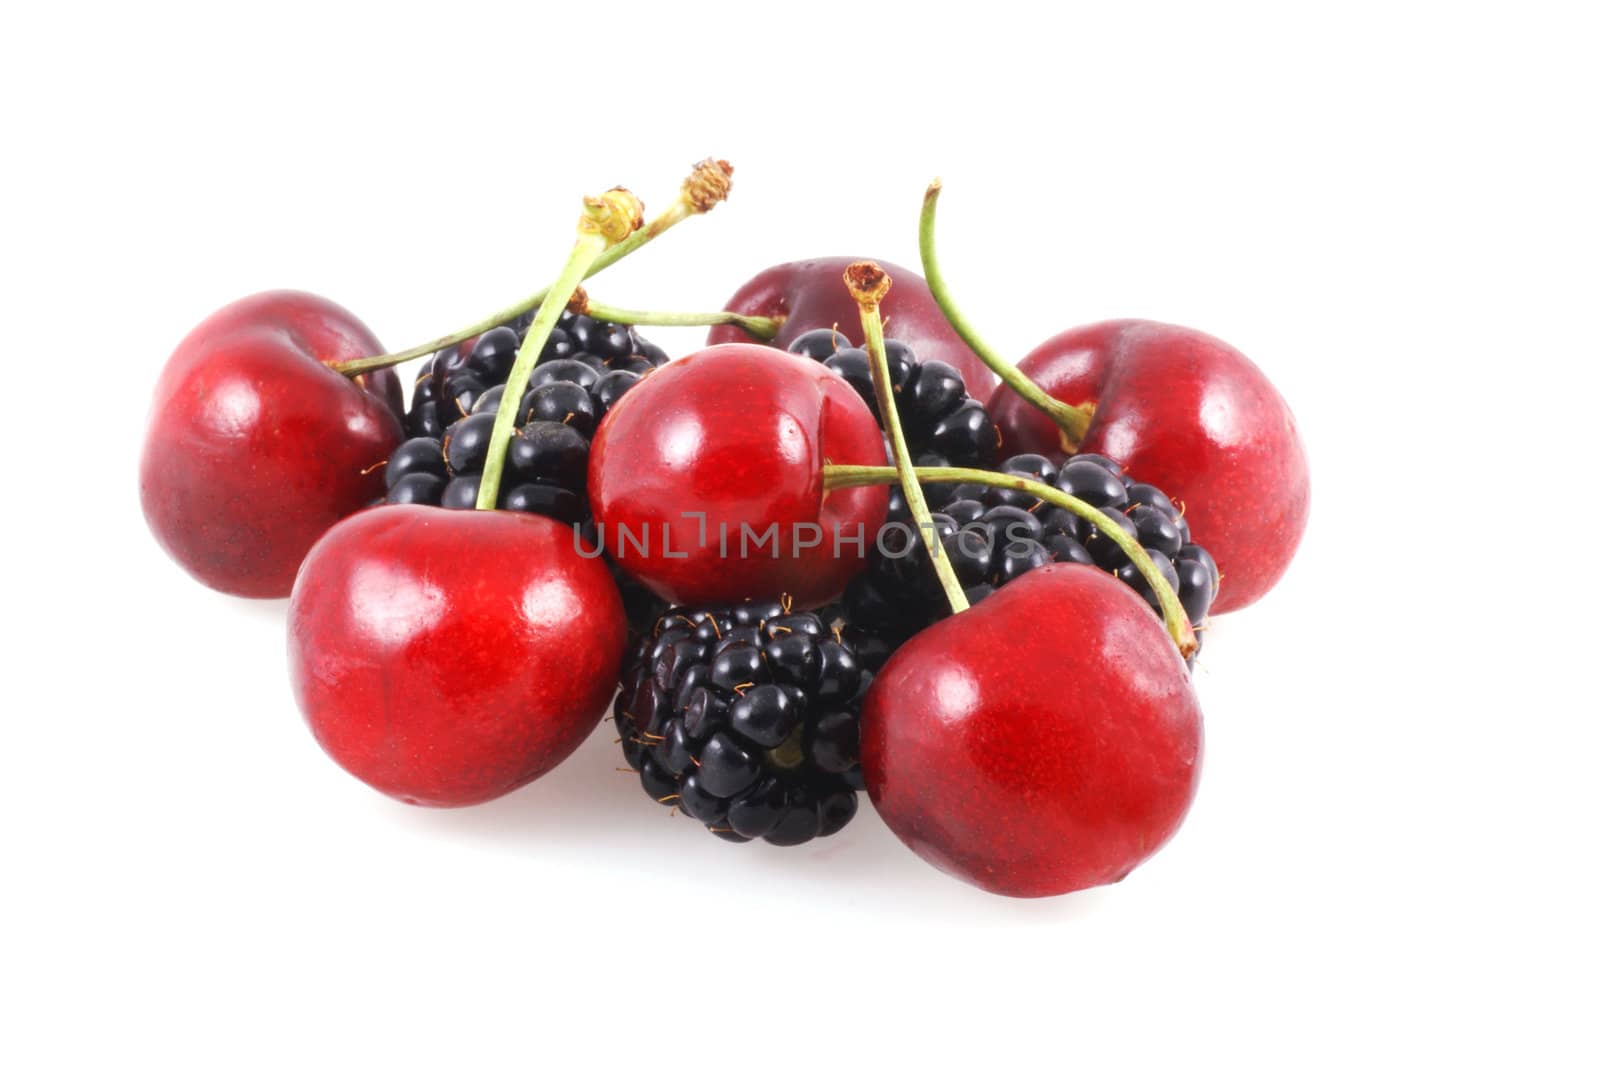 Bunch of cherries and berries isolated on a white background.